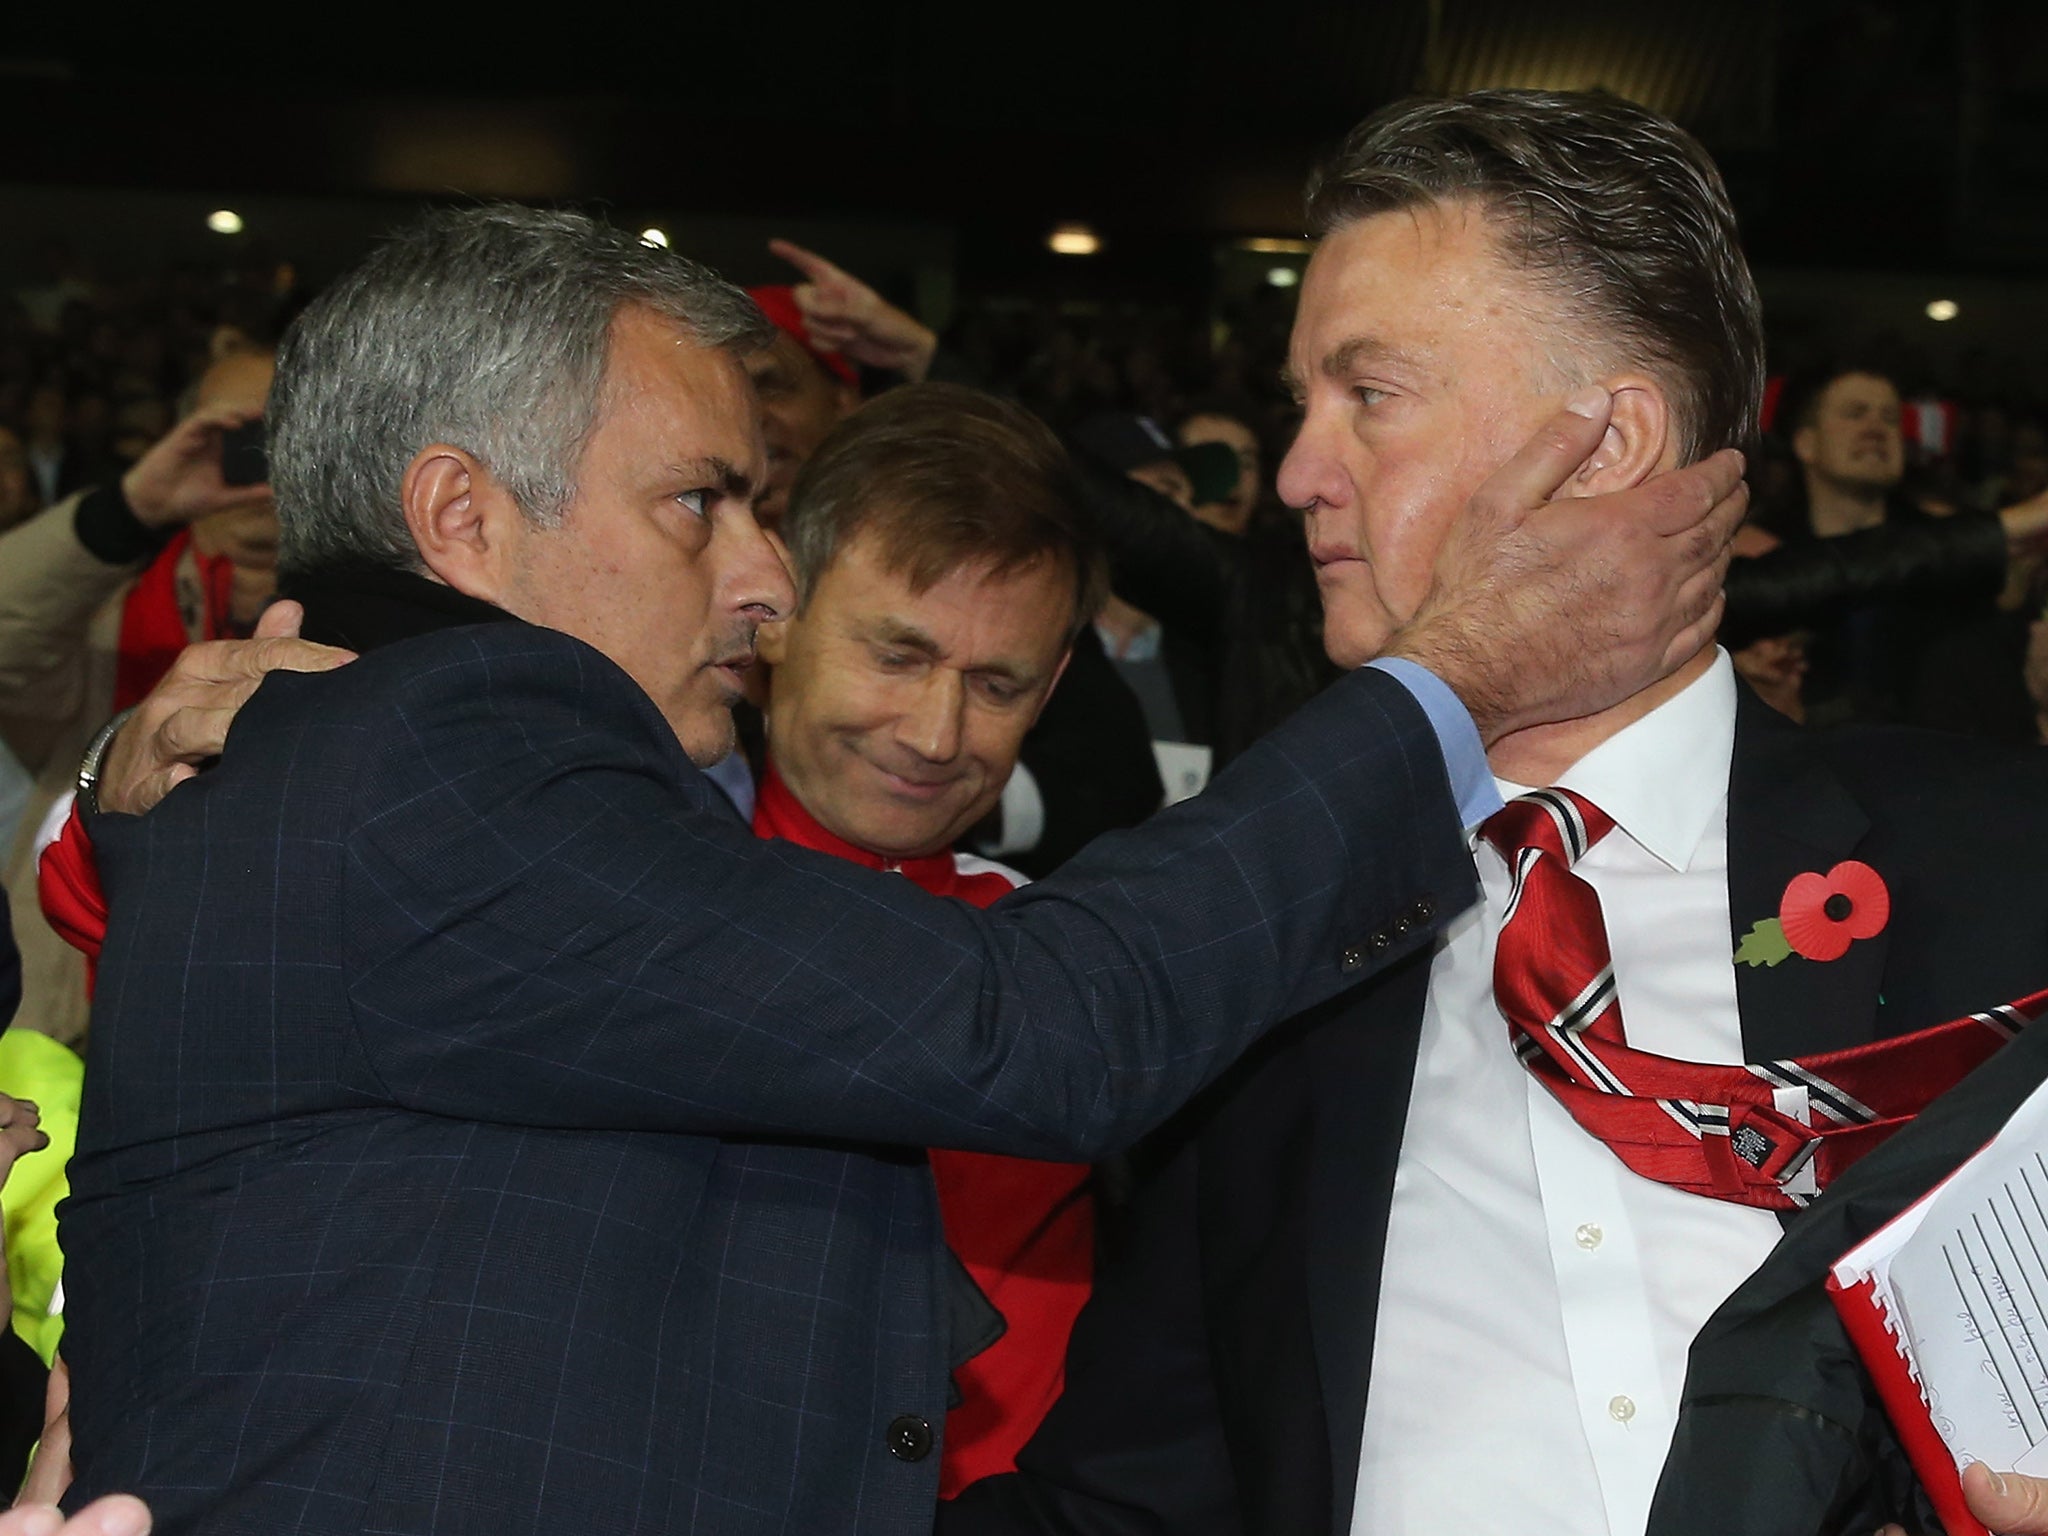 Jose Mourinho, the former Chelsea manager, is expected to replace Van Gaal at Old Trafford